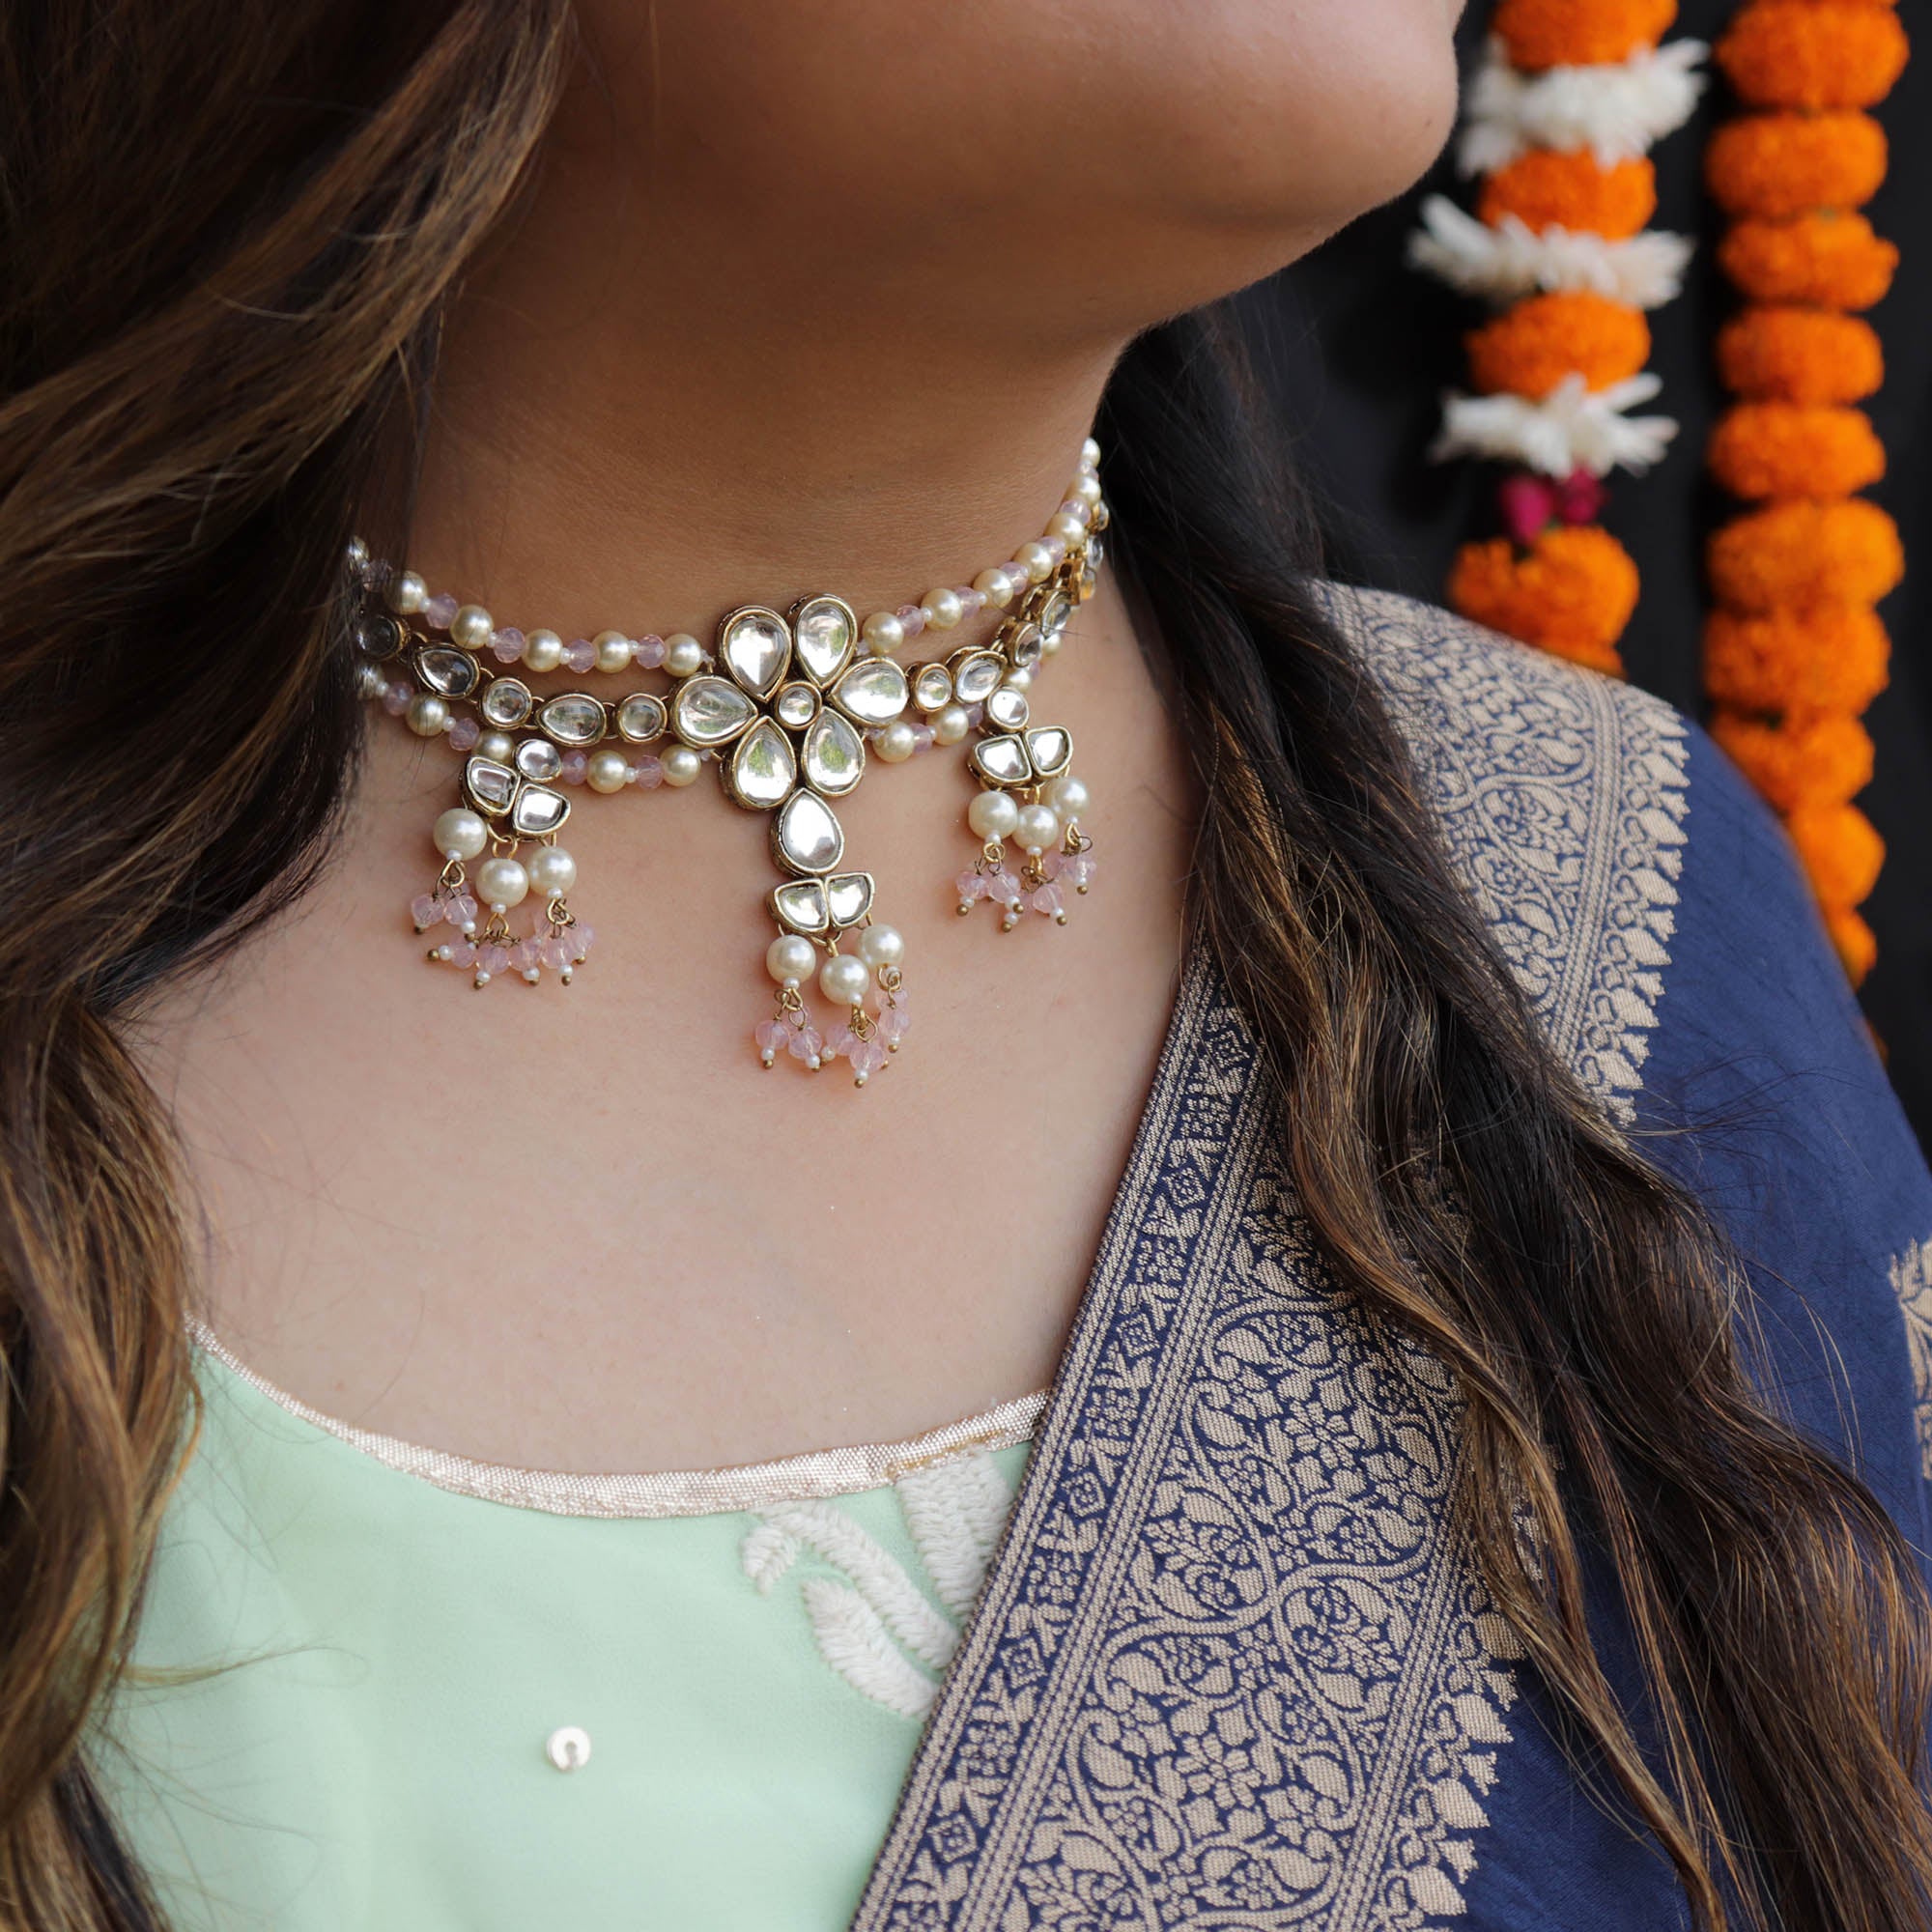 BeAbhika Handmade Artificial Jewelry White Color Pearls Kundan Choker Set With Matching Handmade Pink Necklace Set With Matching Earrings Choker Style Pearl Matching Ethnic Dress Available On COD In India Delhi Heeramandi Style Jewelry Traditional Style Necklace Gift For Women Lightweigth Layered Moti Necklace Set Jewelruy Set 